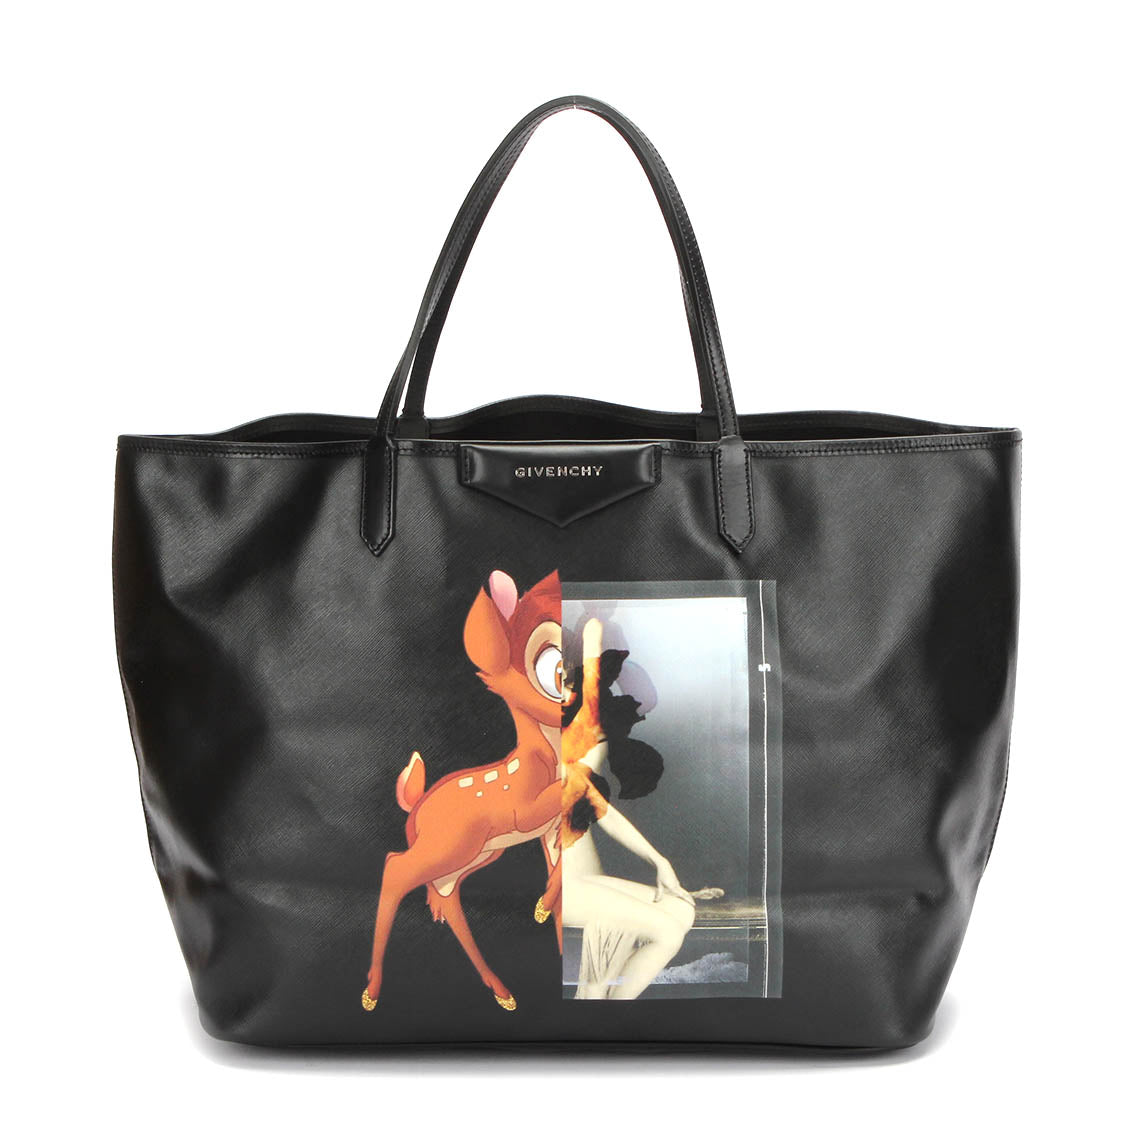 Givenchy Bambi Antigona Leather Tote Bag Leather Shoulder Bag in Excellent condition